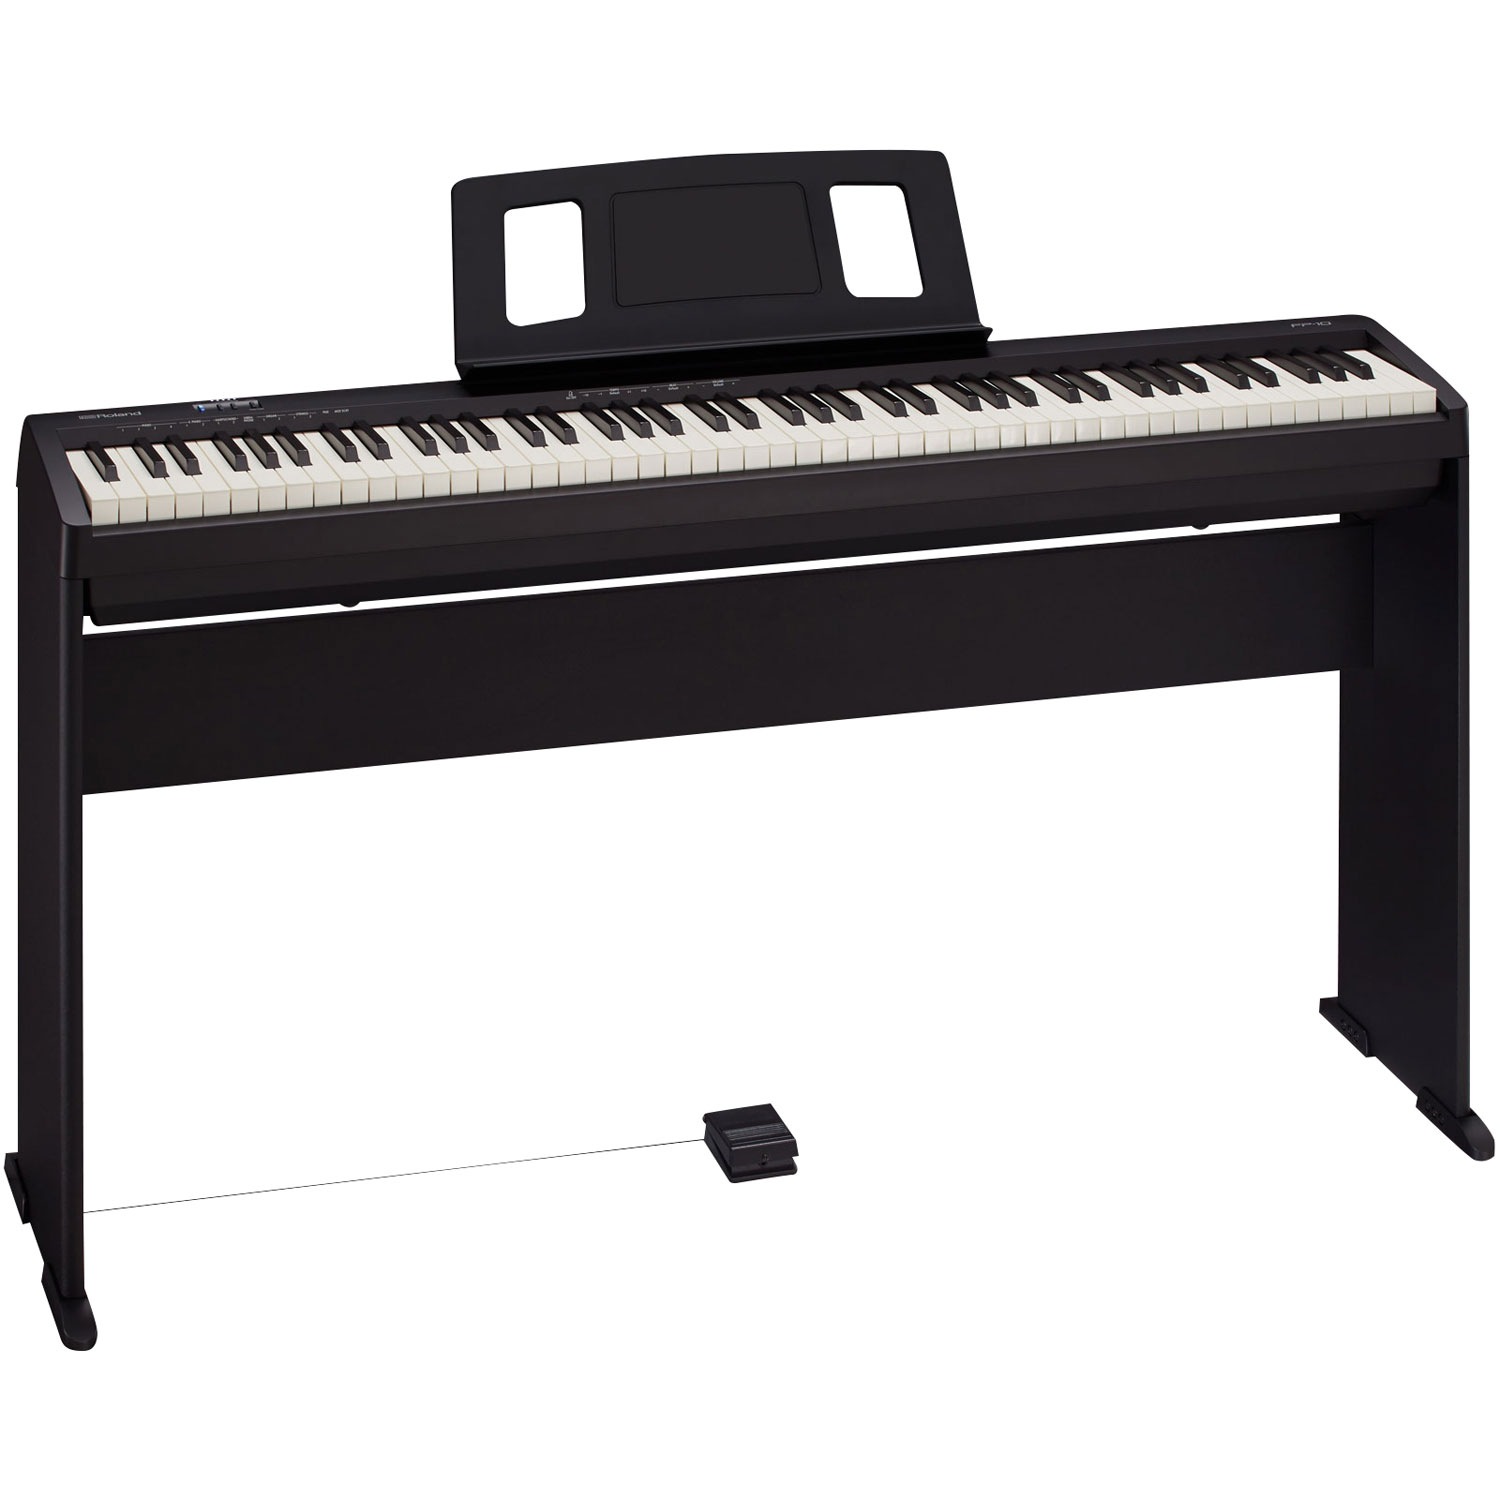 Roland FP-10 88-Key Weighted Hammer Action Digital Piano with Stand - Black